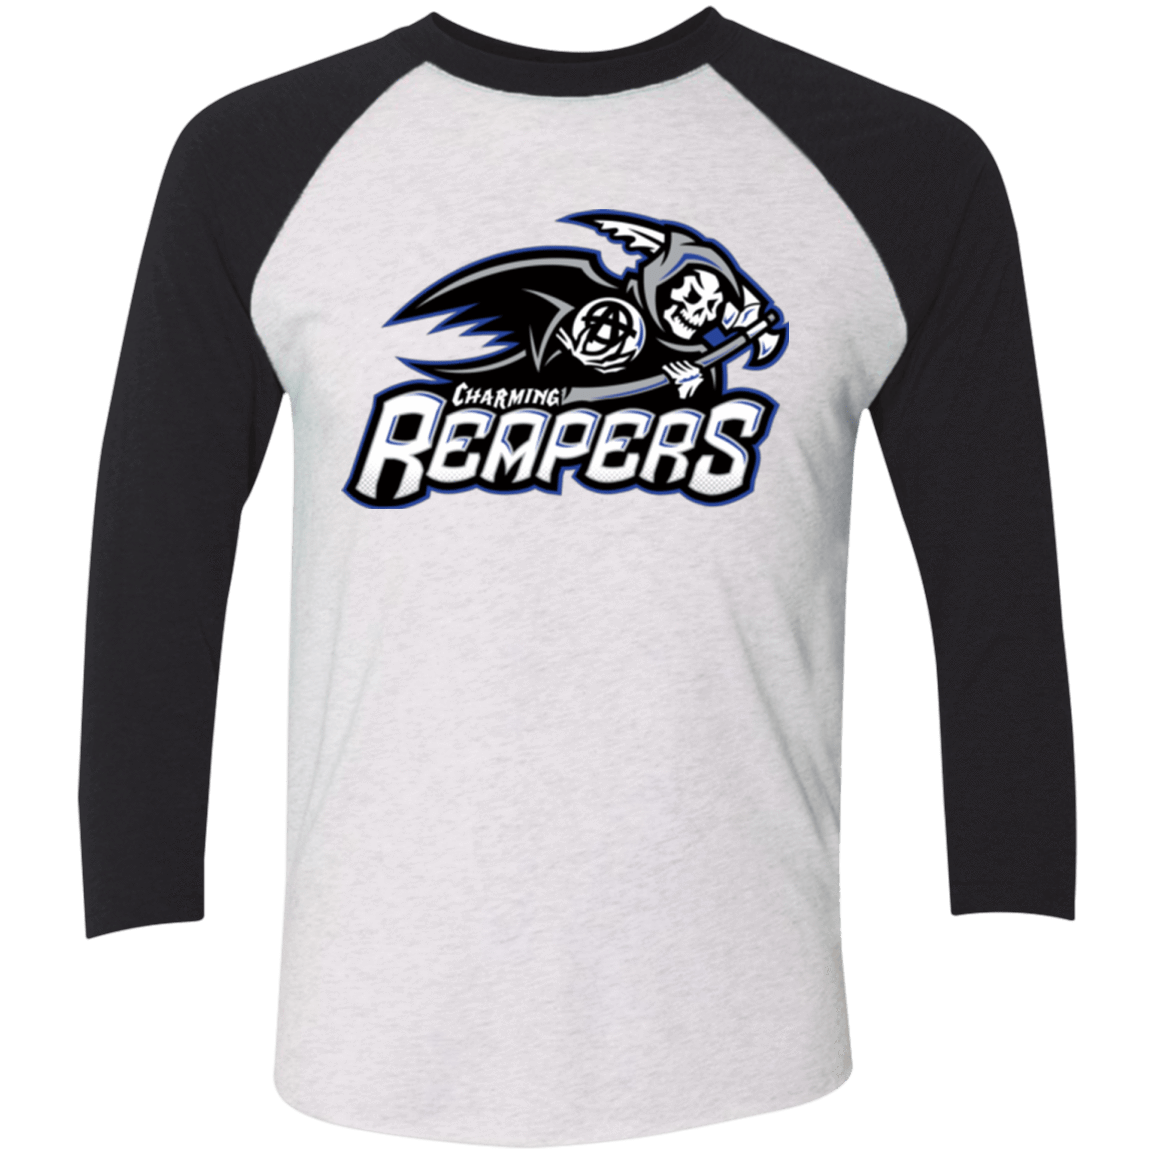 T-Shirts Heather White/Vintage Black / X-Small Charming Reapers Triblend 3/4 Sleeve